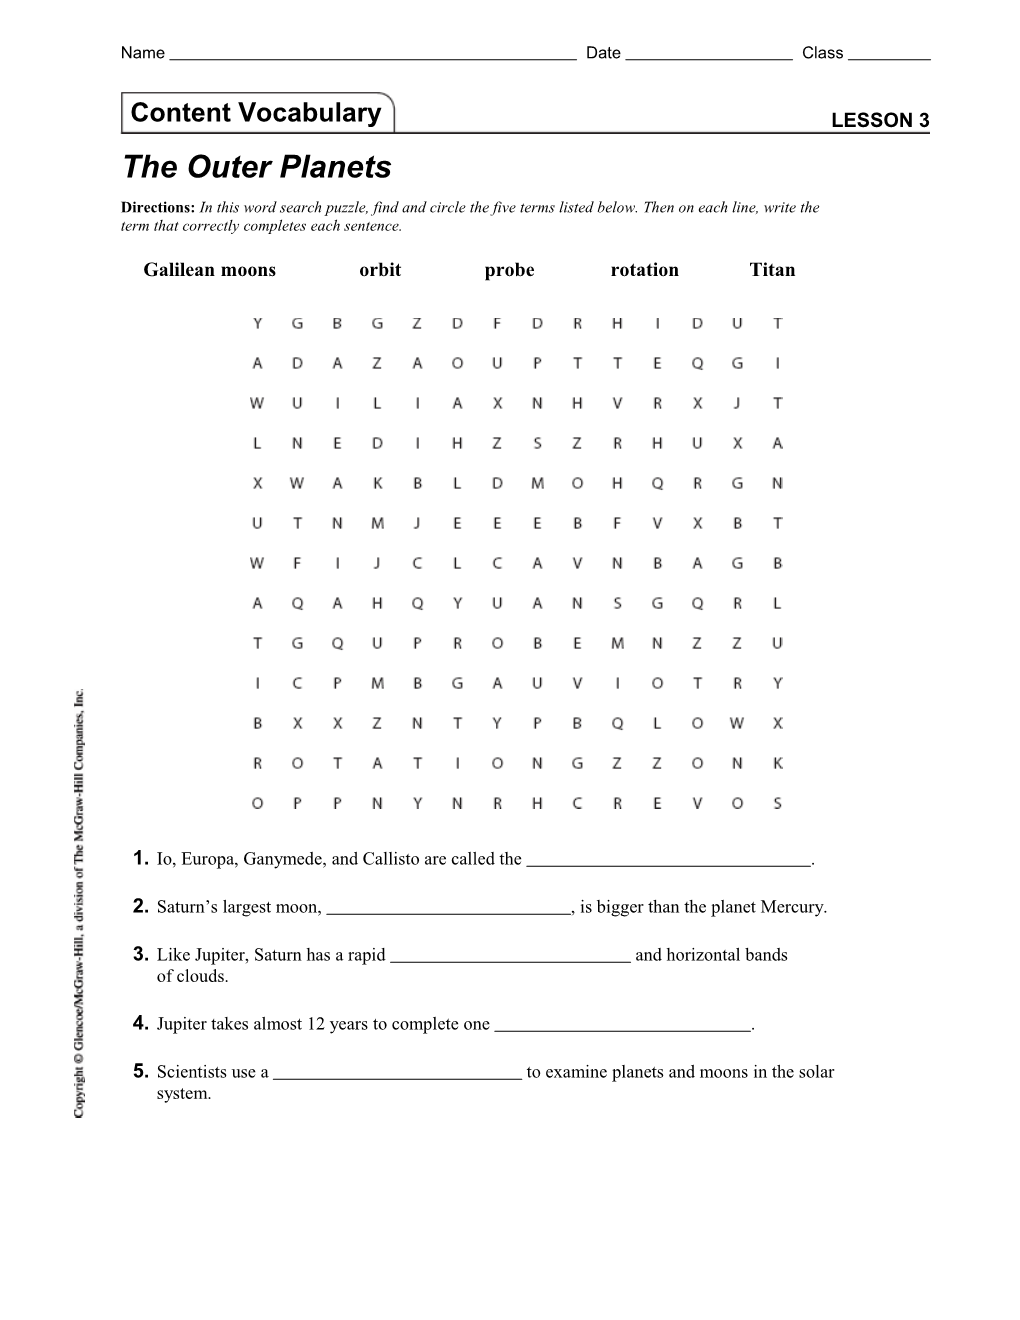 Lesson 3 the Outer Planets